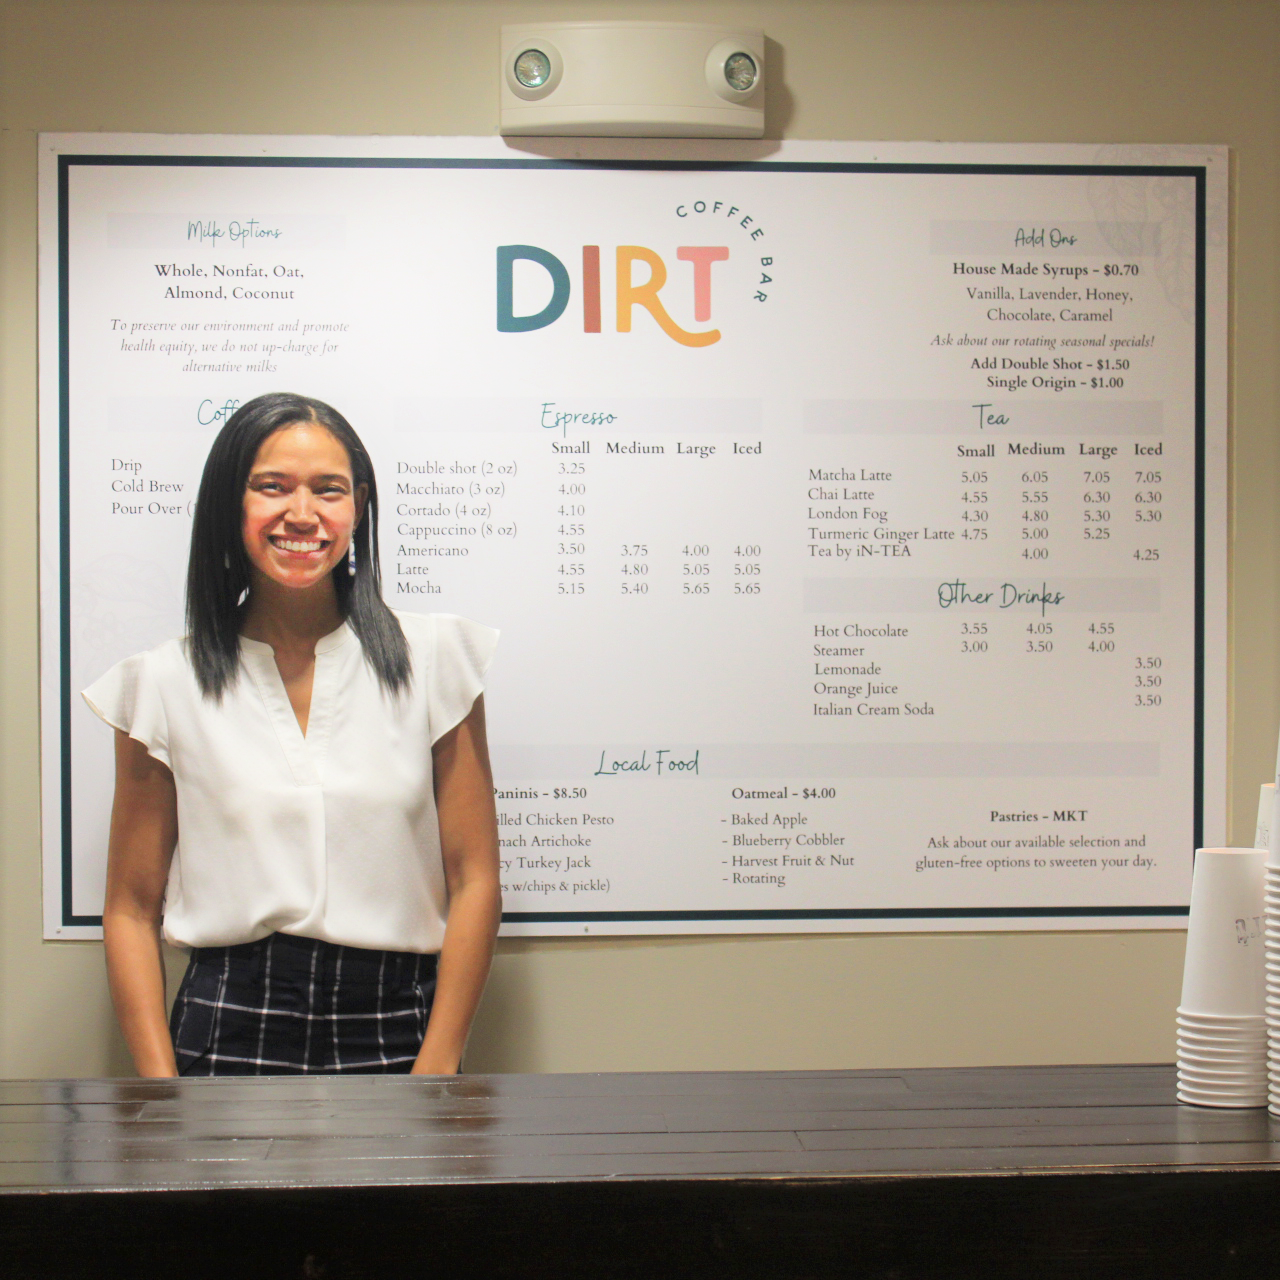 Catharina Hughey, Executive Director of Dirt Coffee in front of the Dirt Coffee menu